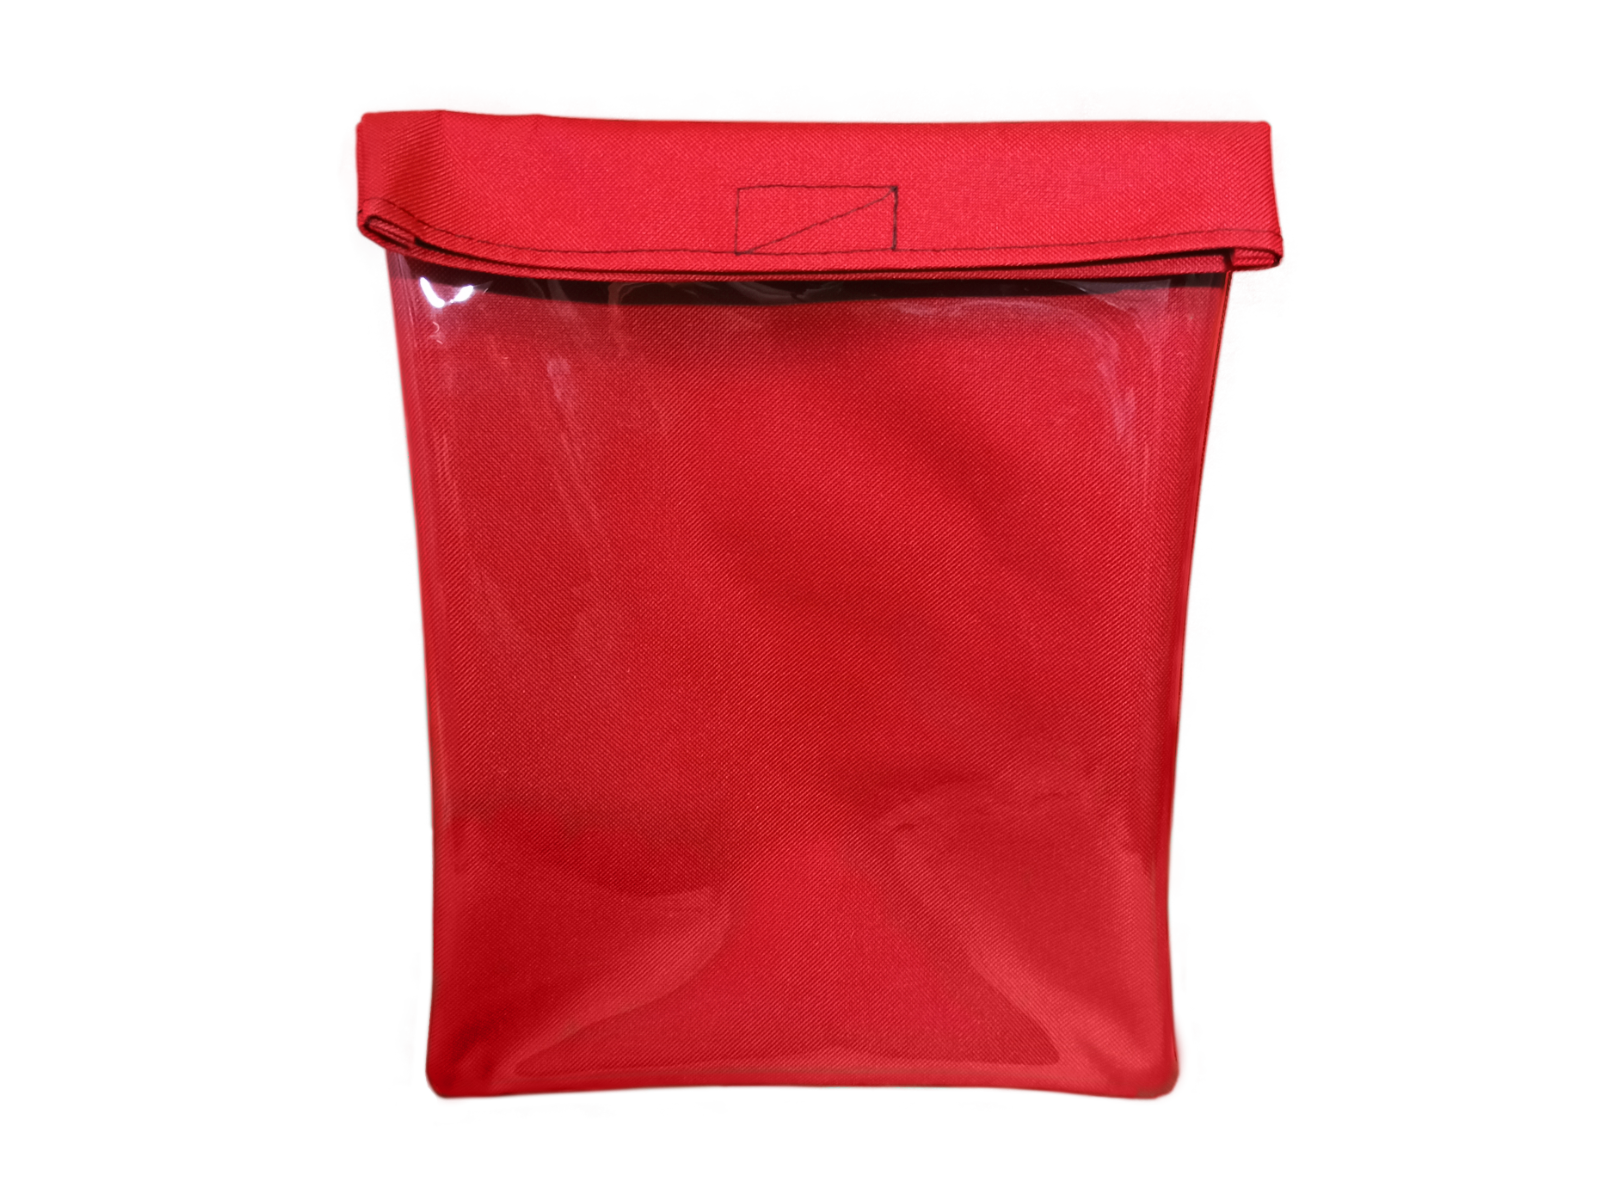 https://mykangapouch.ca/wp-content/uploads/2015/11/Kanga-Pouch-Red-School-Bag-for-Paper-Work.png